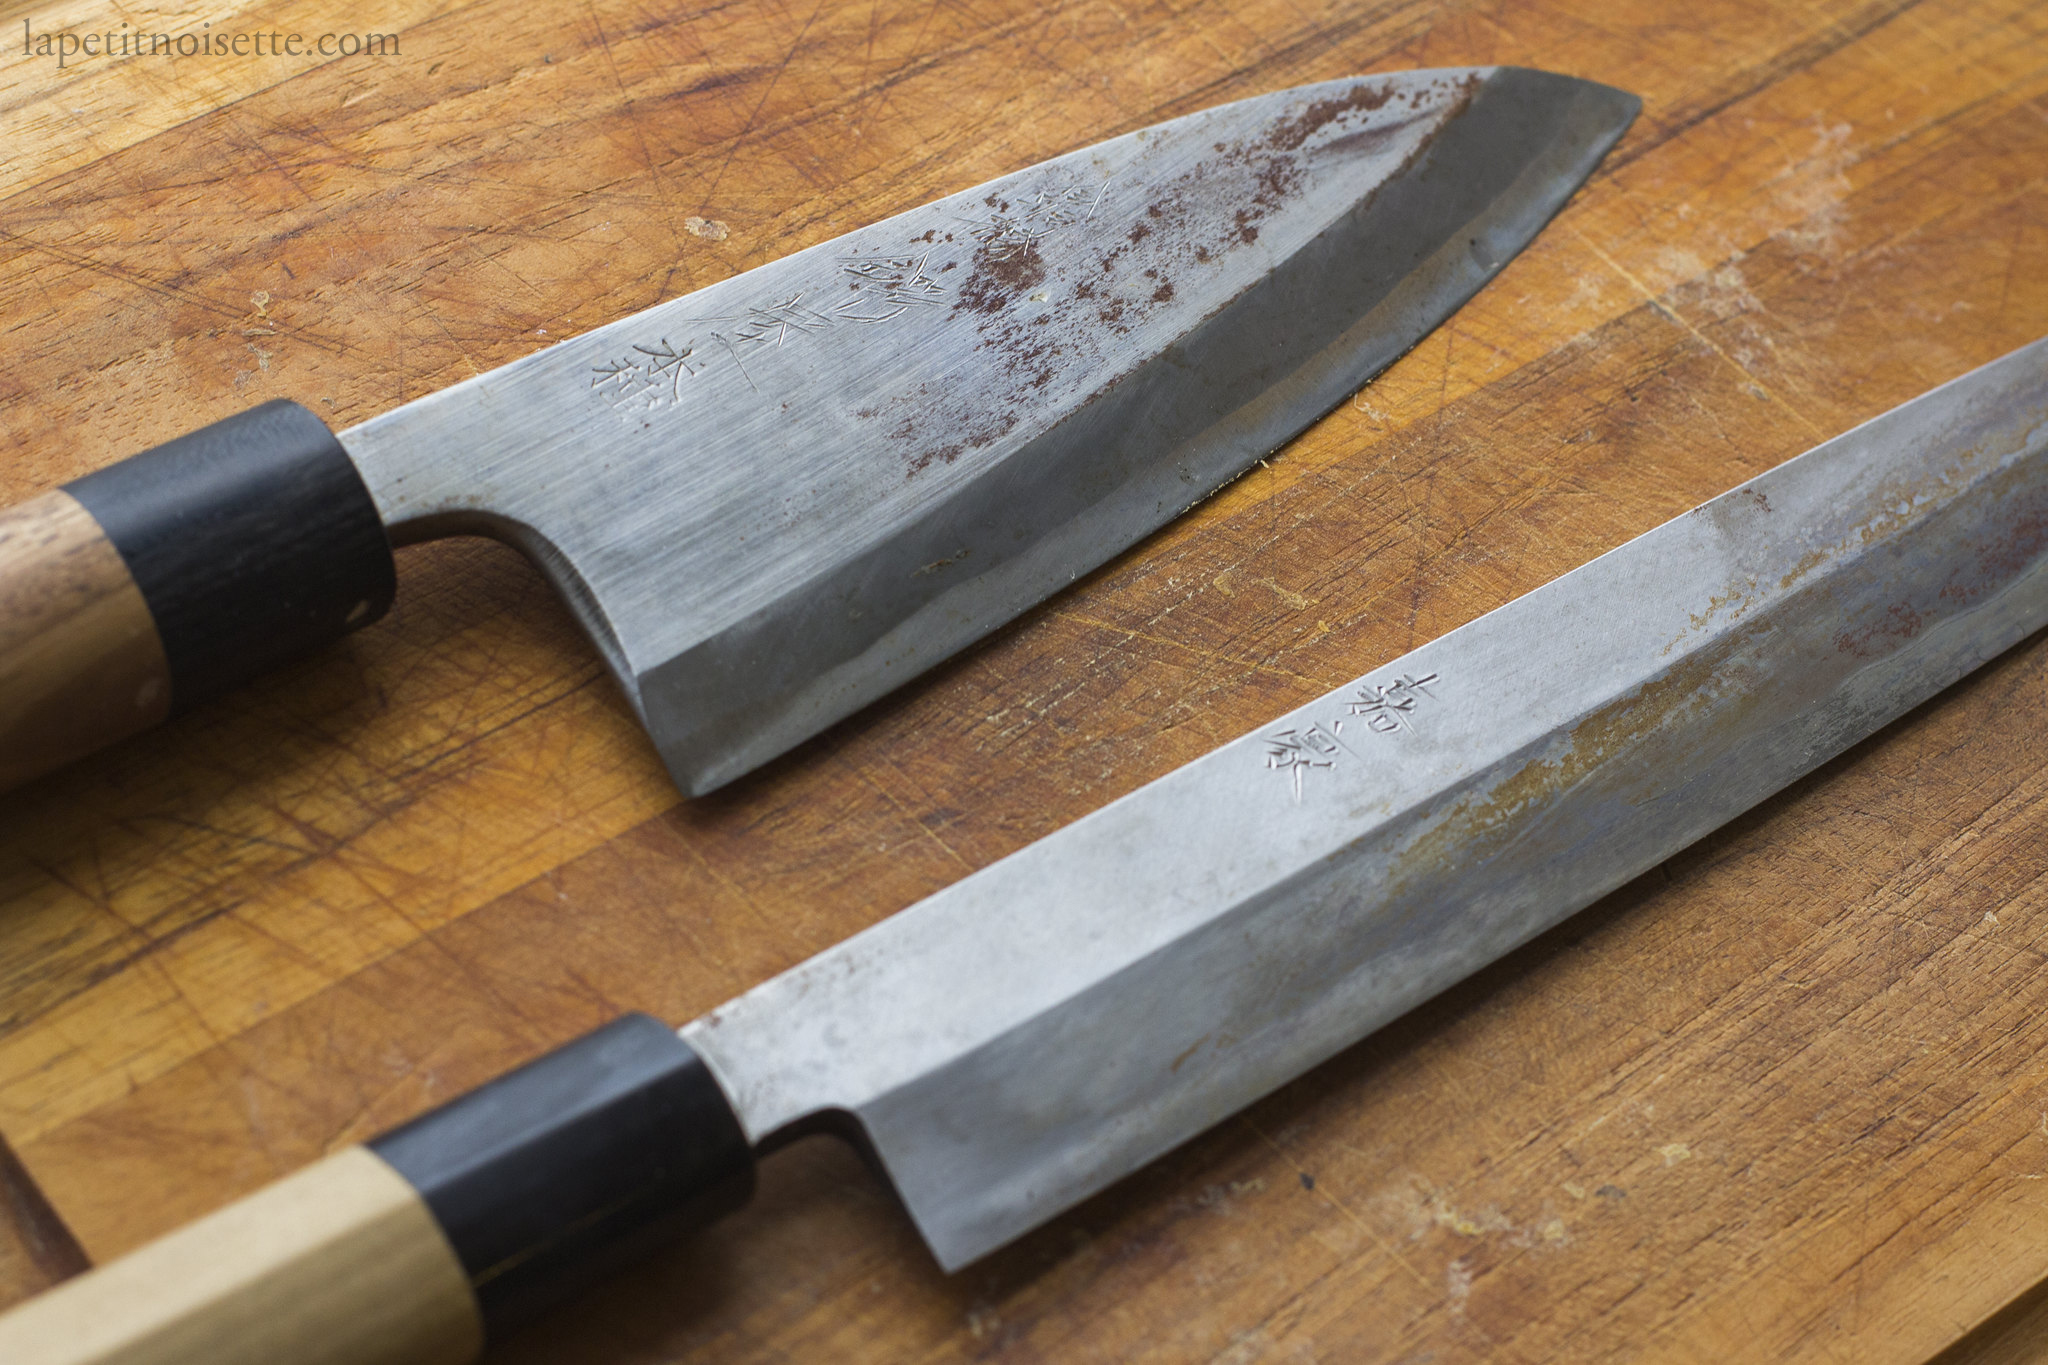 Rusted sushi knives that need maintaining.